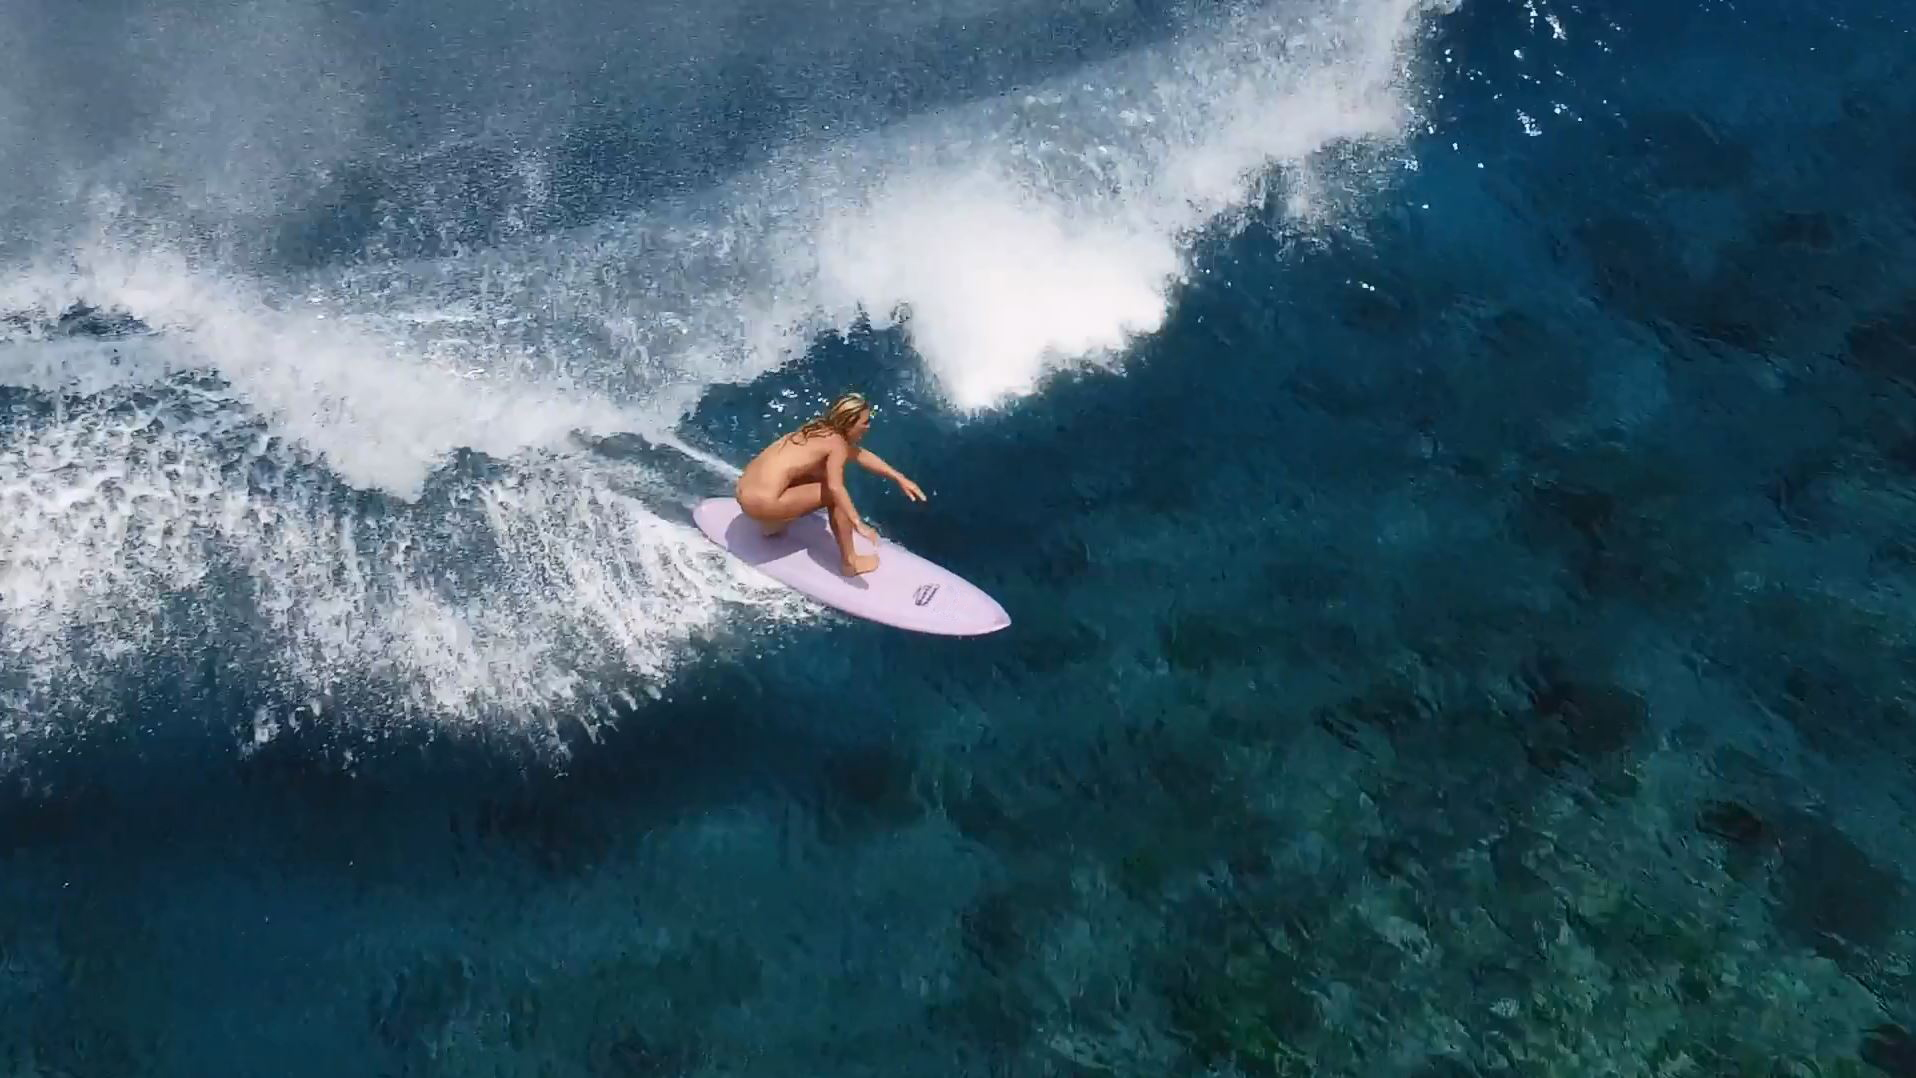 Felicity Palmateer Discusses Her Controversial Nude Surfing Film Skin